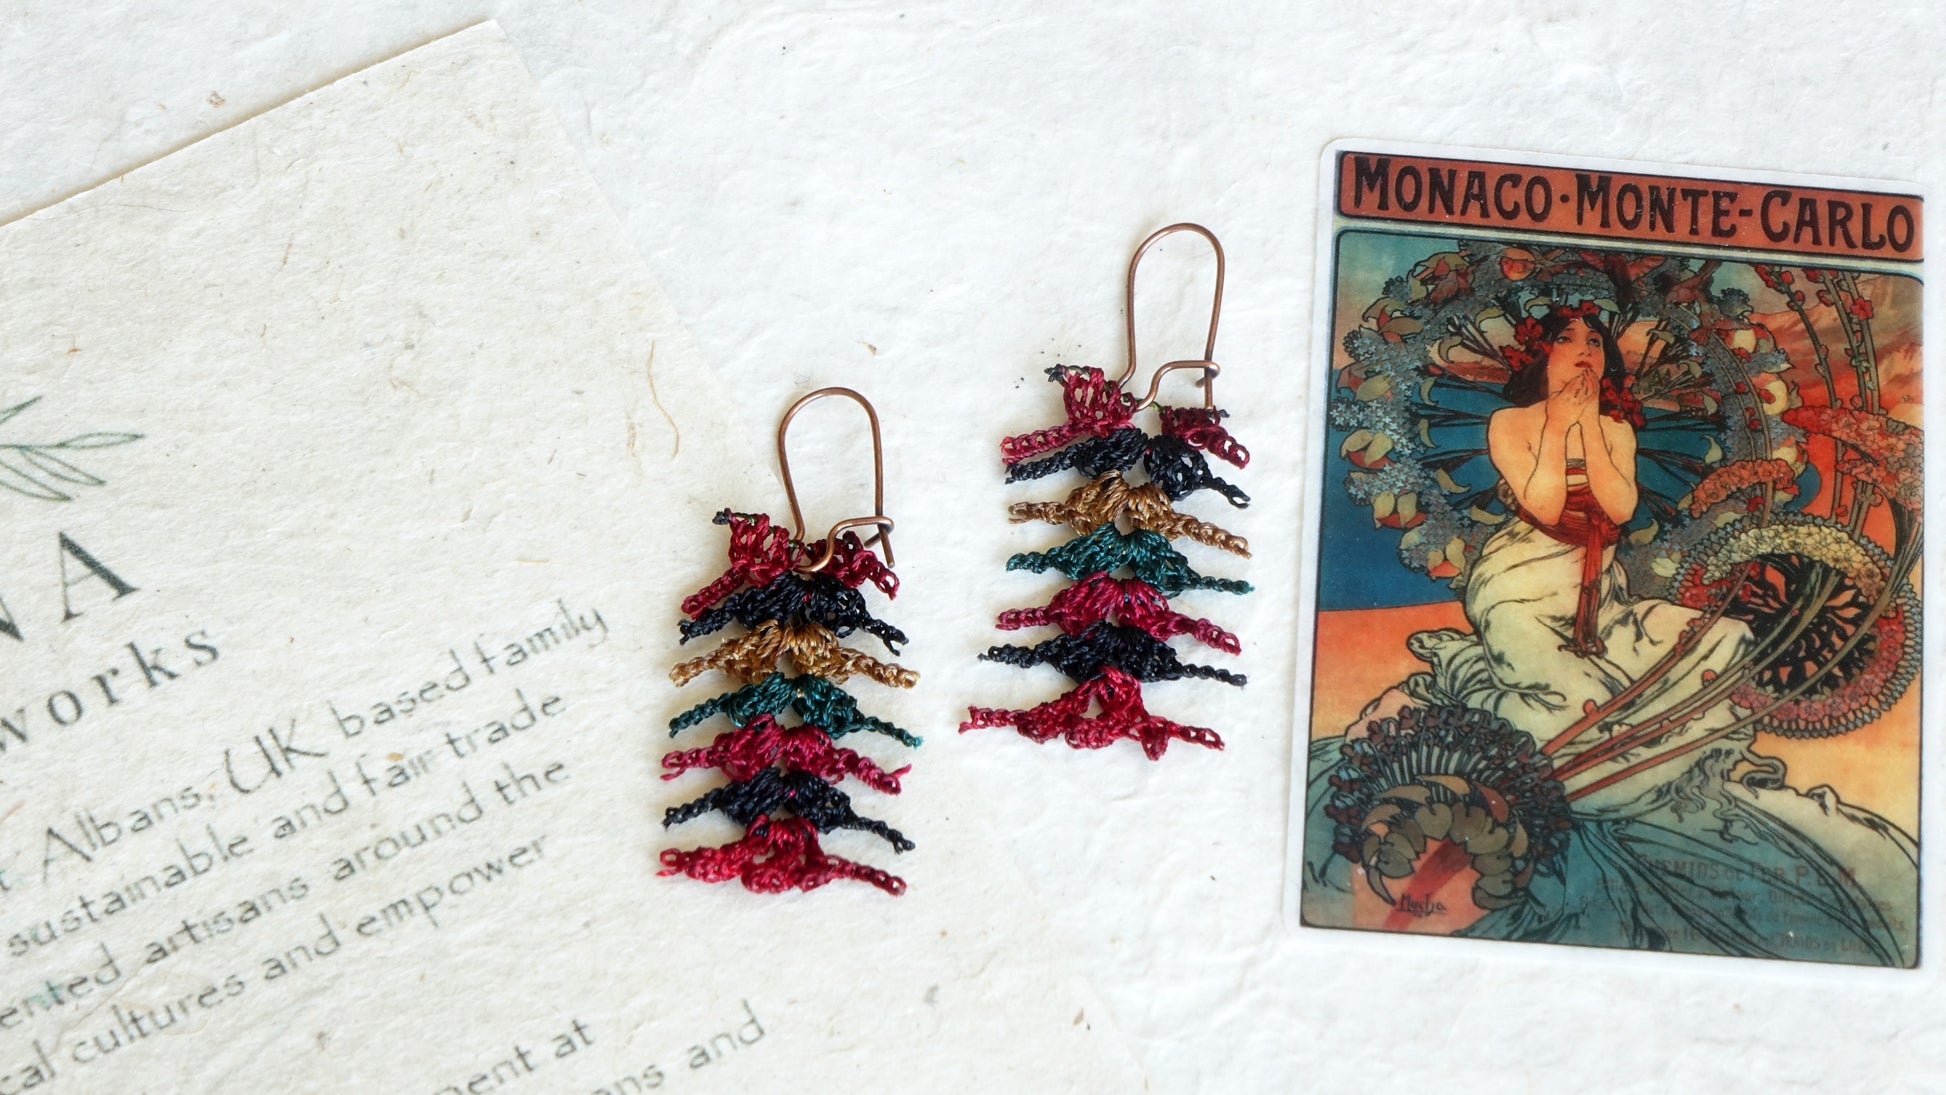 Needle Lace Earrings - Mulberry Vibes - Verna Artisan Works